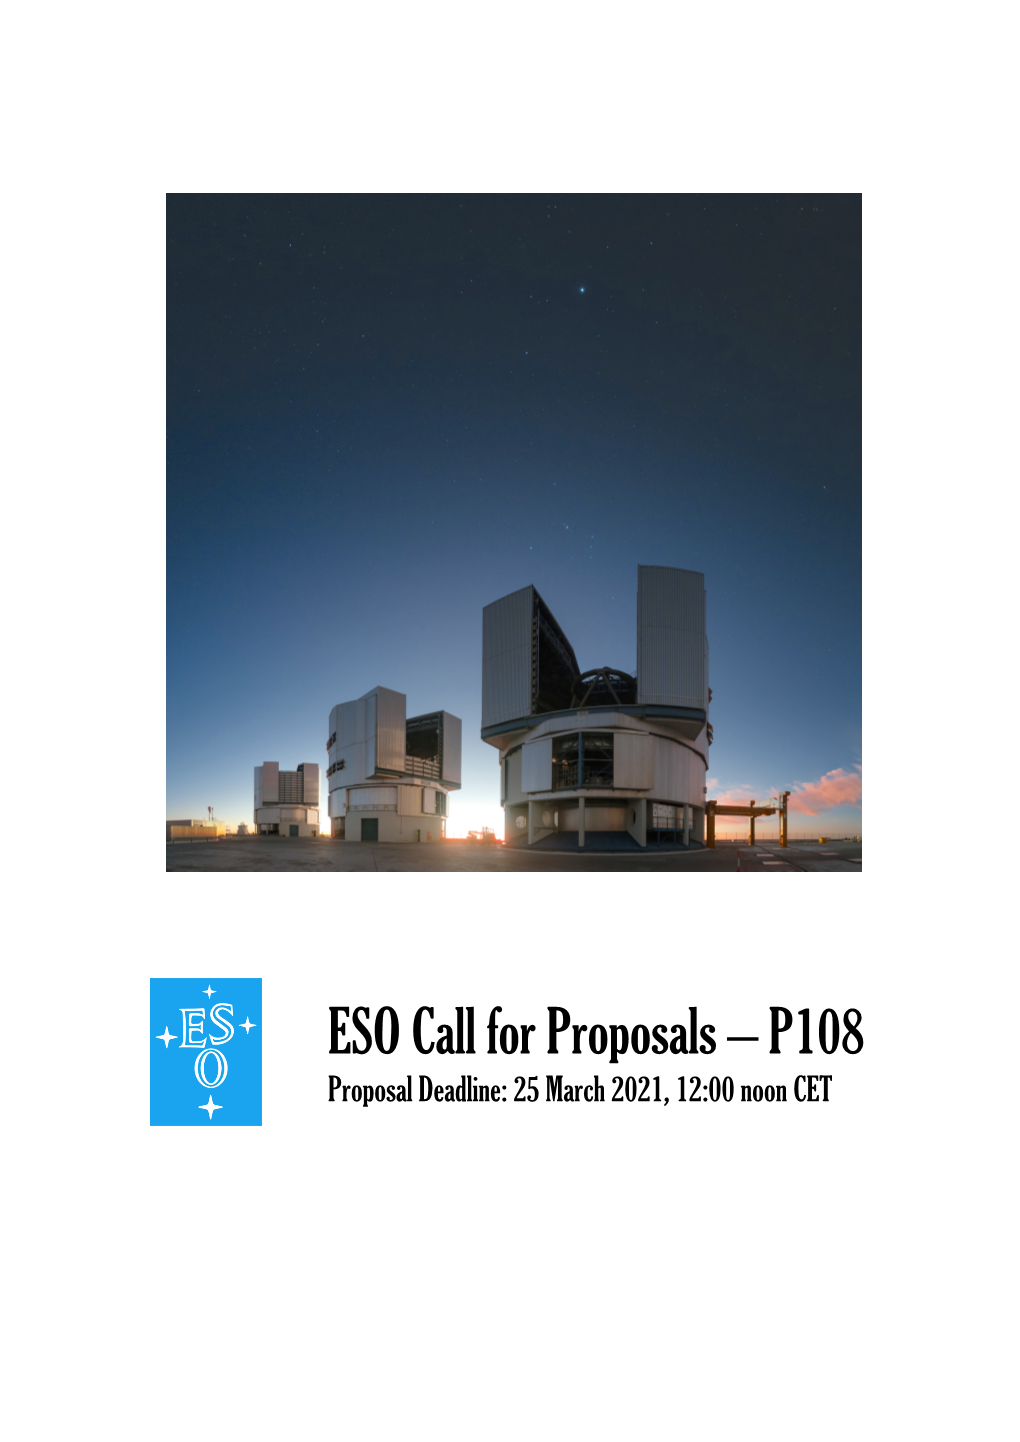 P108 Proposal Deadline: 25 March 2021, 12:00 Noon CET * Call for Proposals